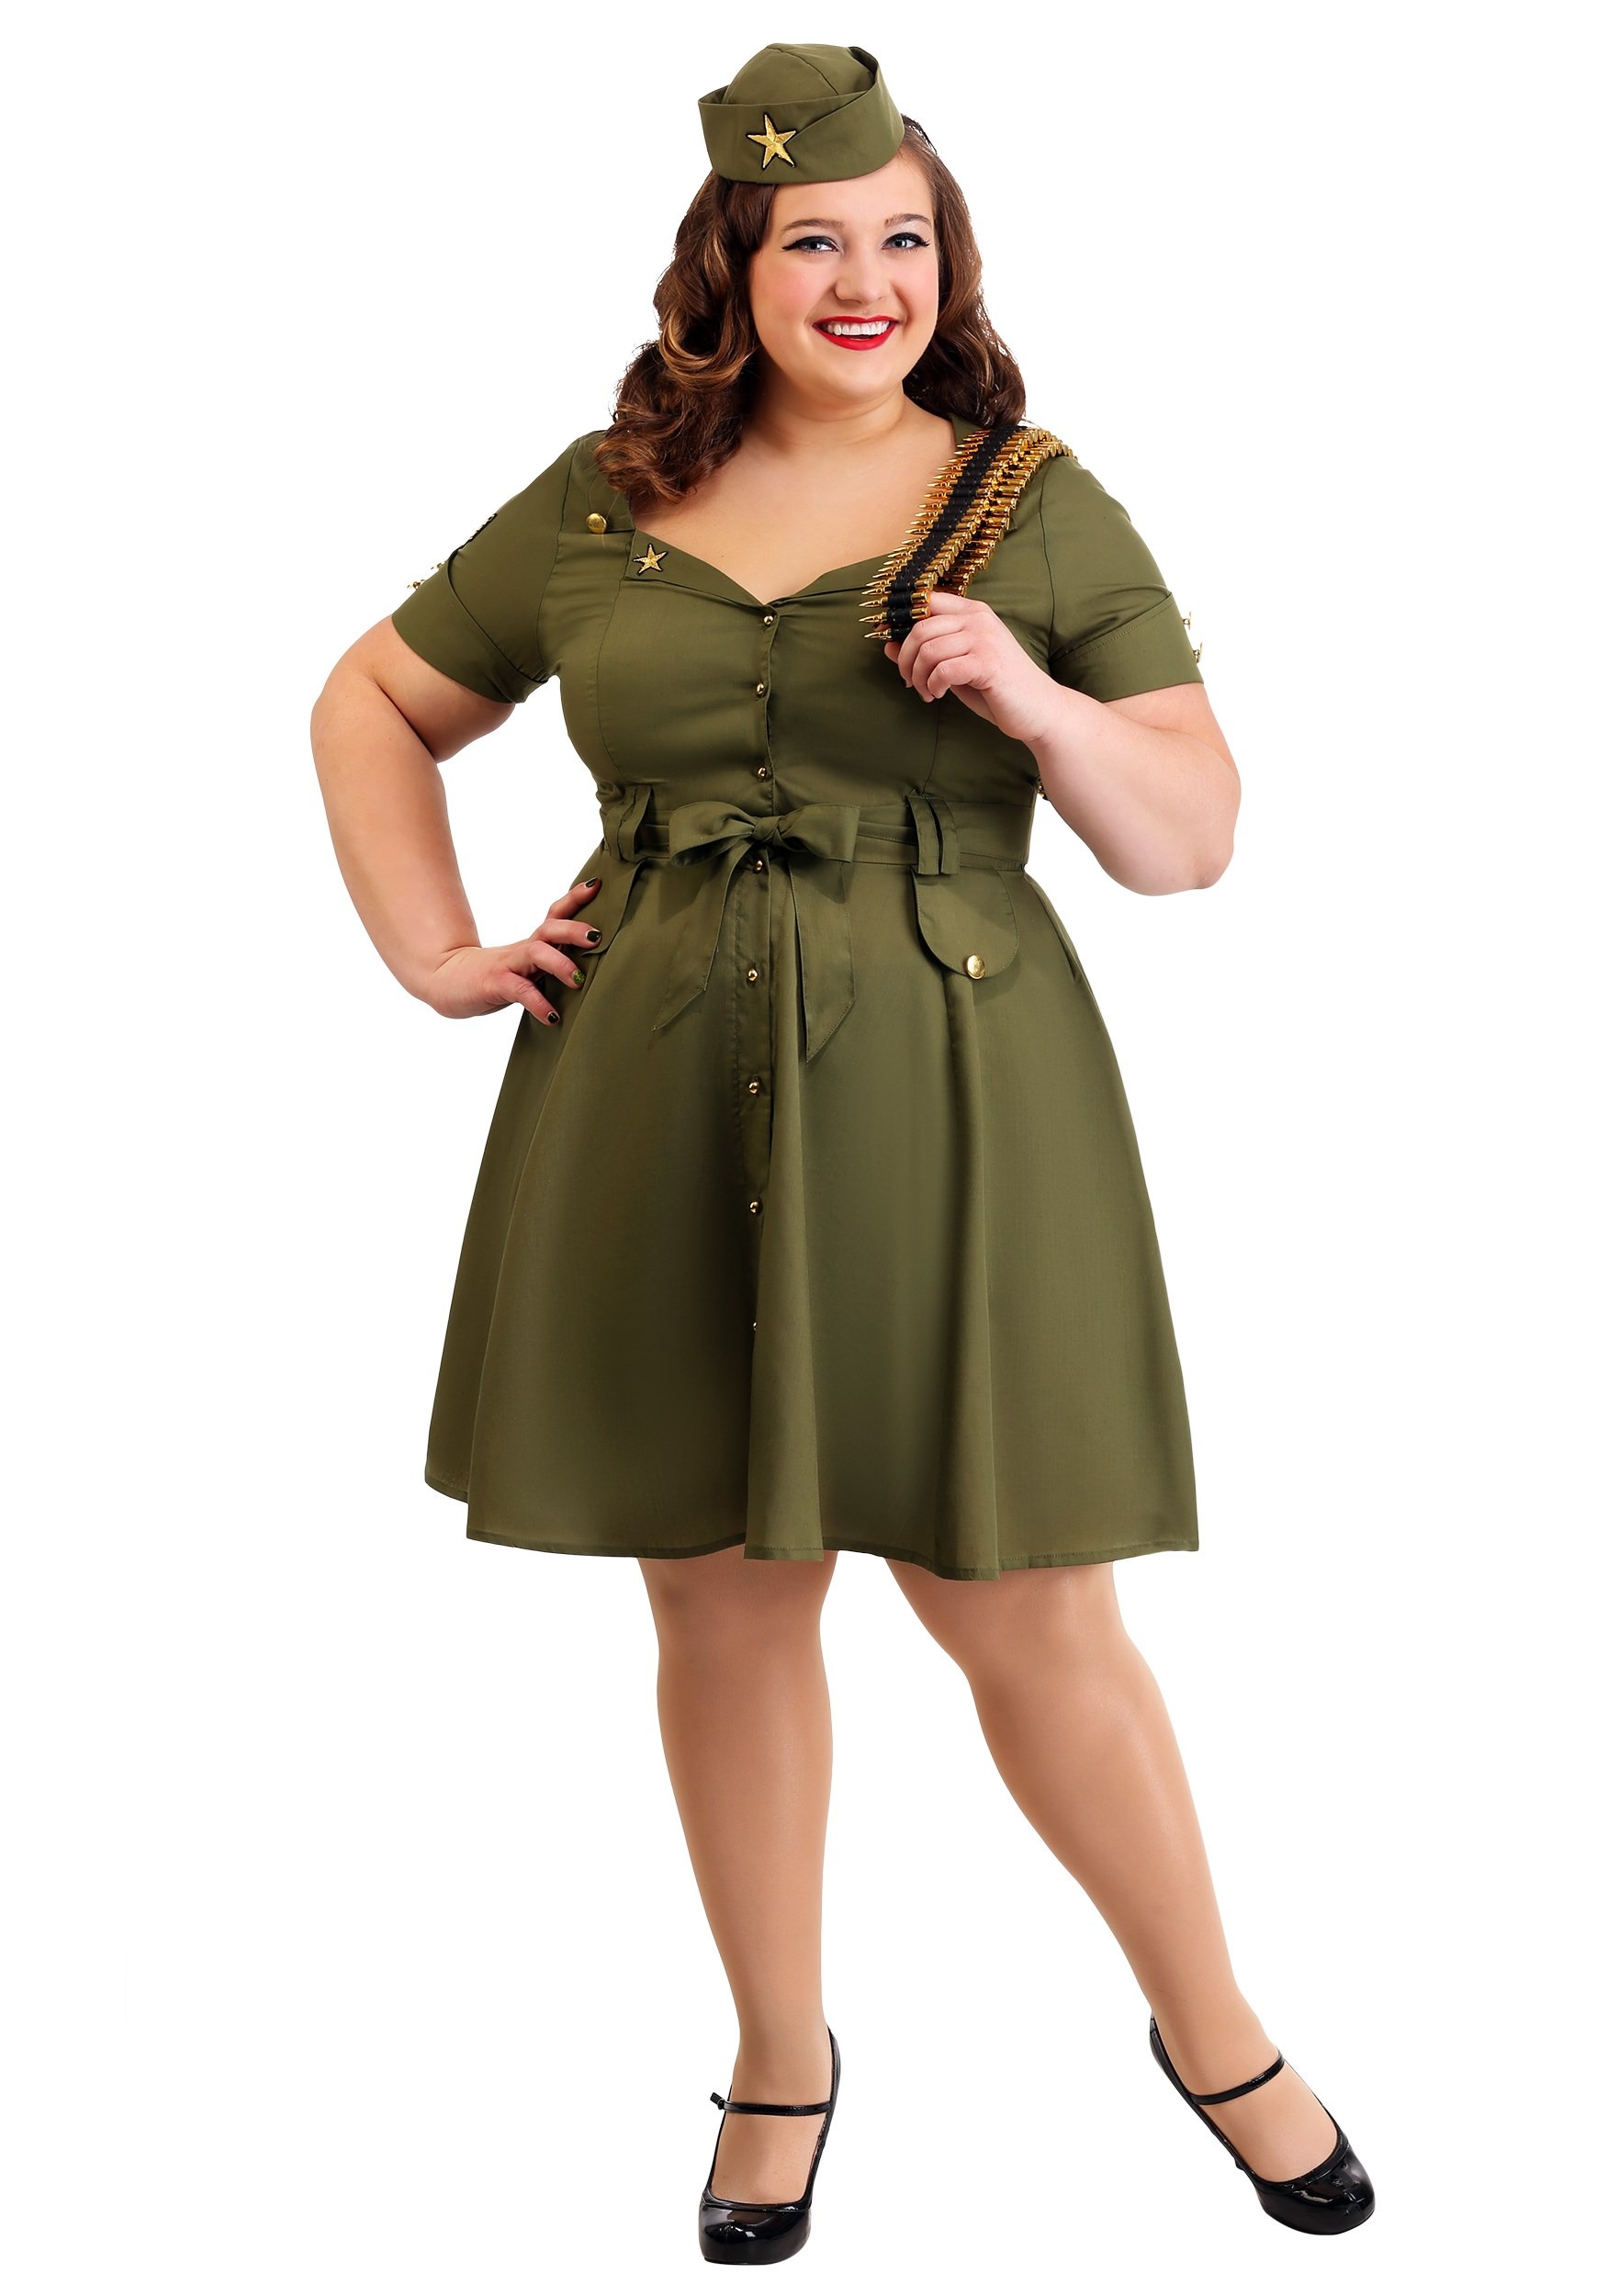 https://images.halloweencostumes.ca/products/44962/1-1/plus-size-vintage-combat-cutie-for-women.jpg